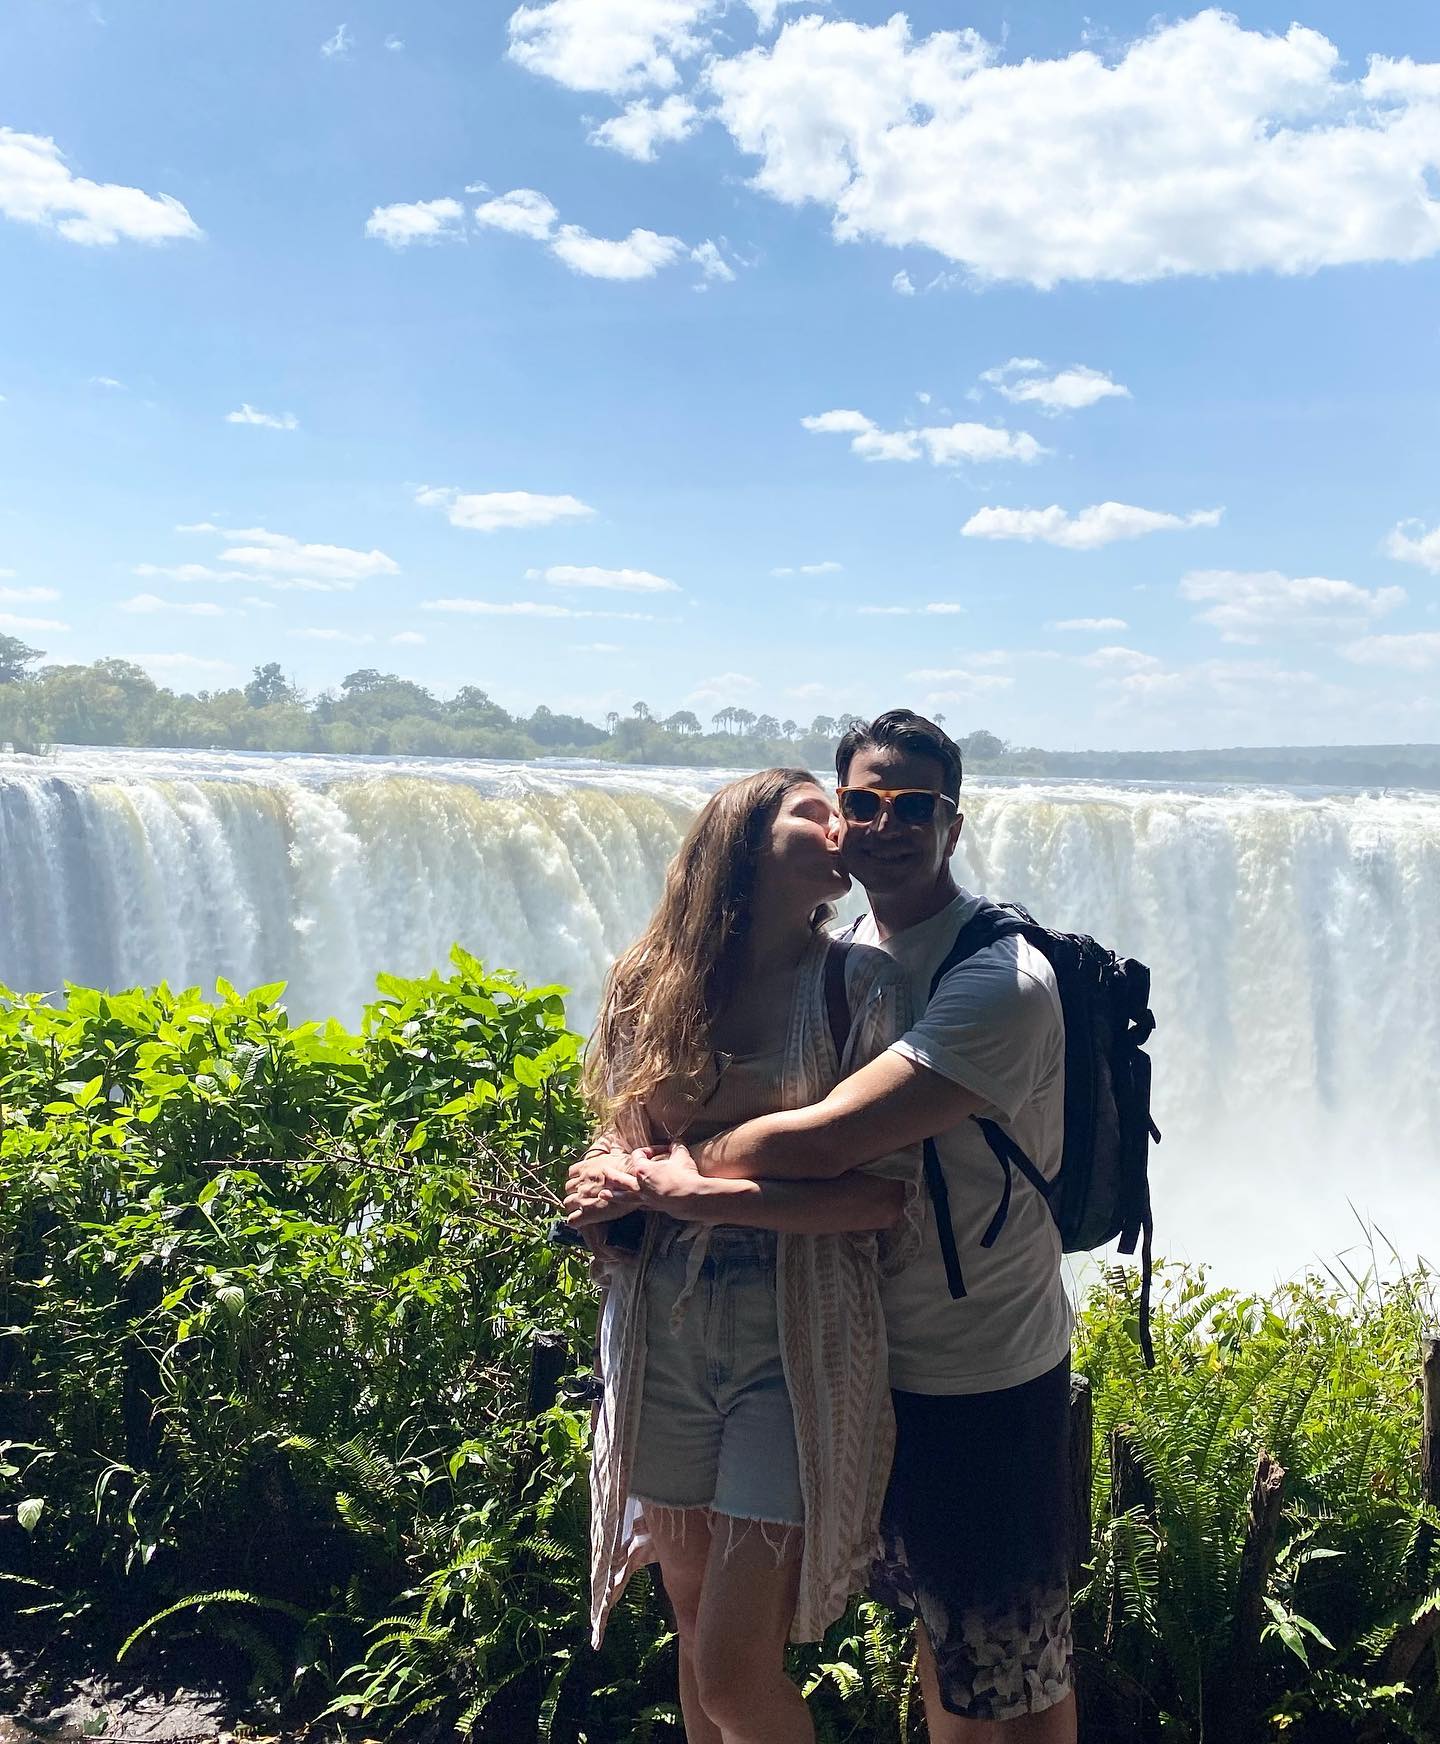 Photo shared by Marilia Yiallouridou on April 24 2023 tagging @andreasvoulgaris. May be an image of 1 person and Iguazu Falls